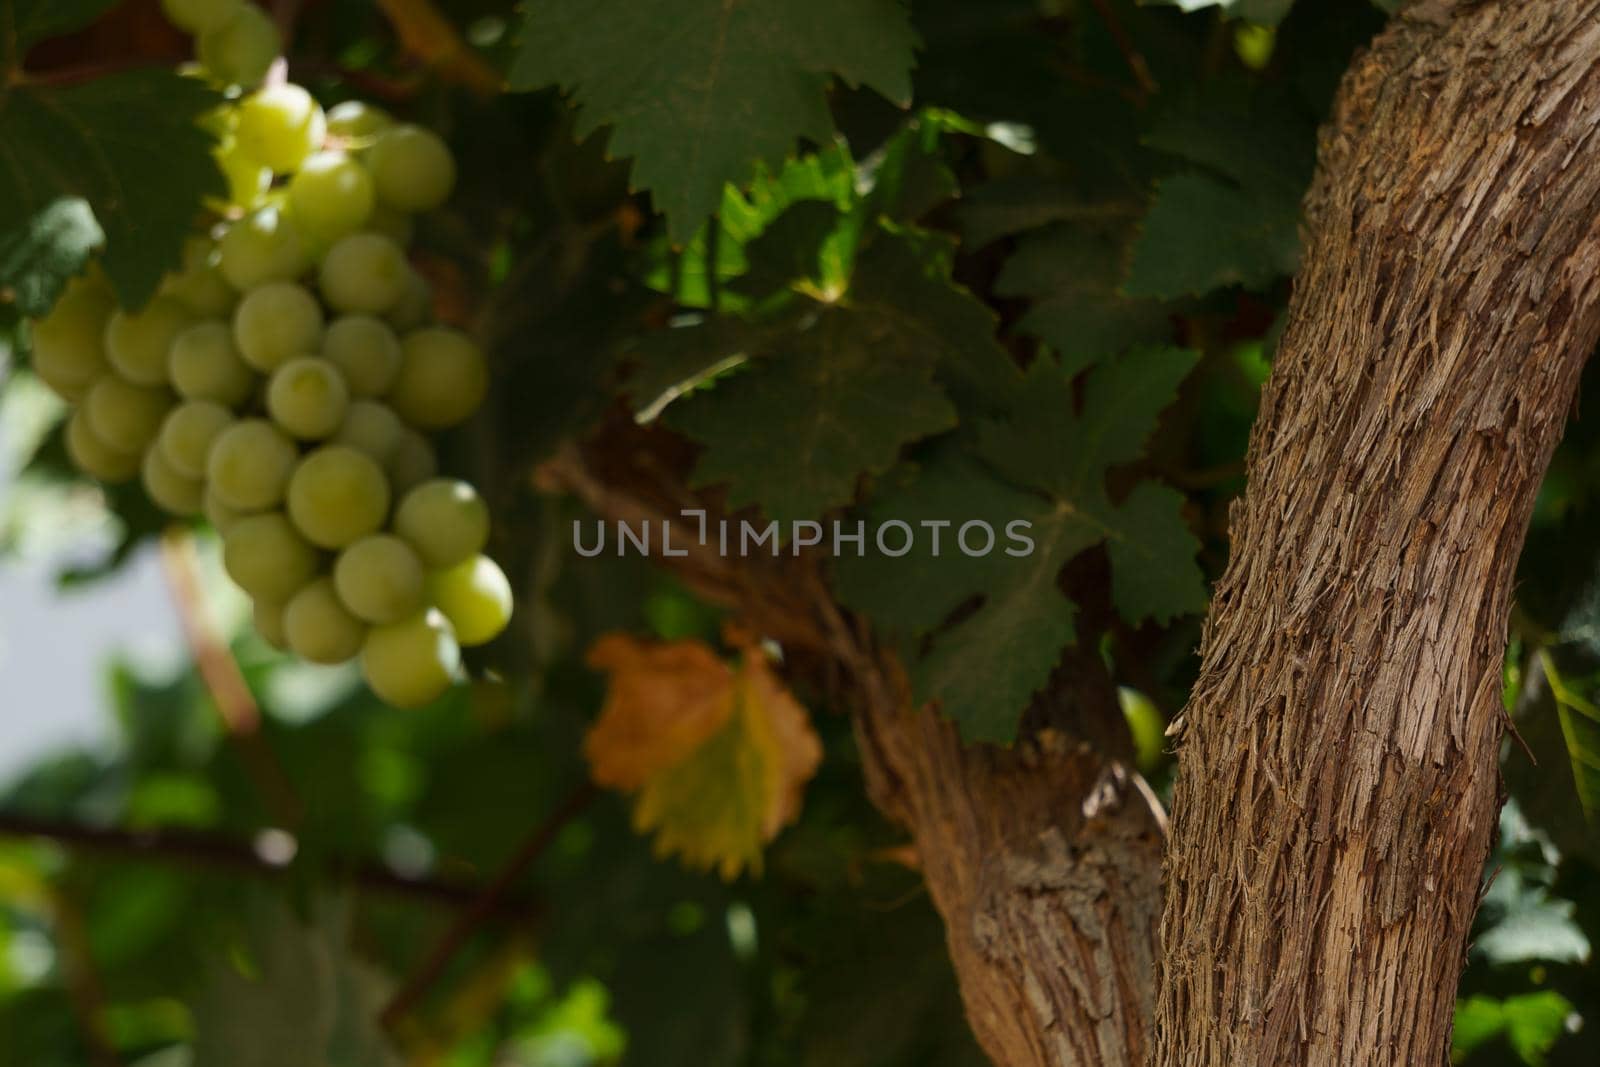 close-up of a bunch of green grapes on the vine illuminated by the sun's rays